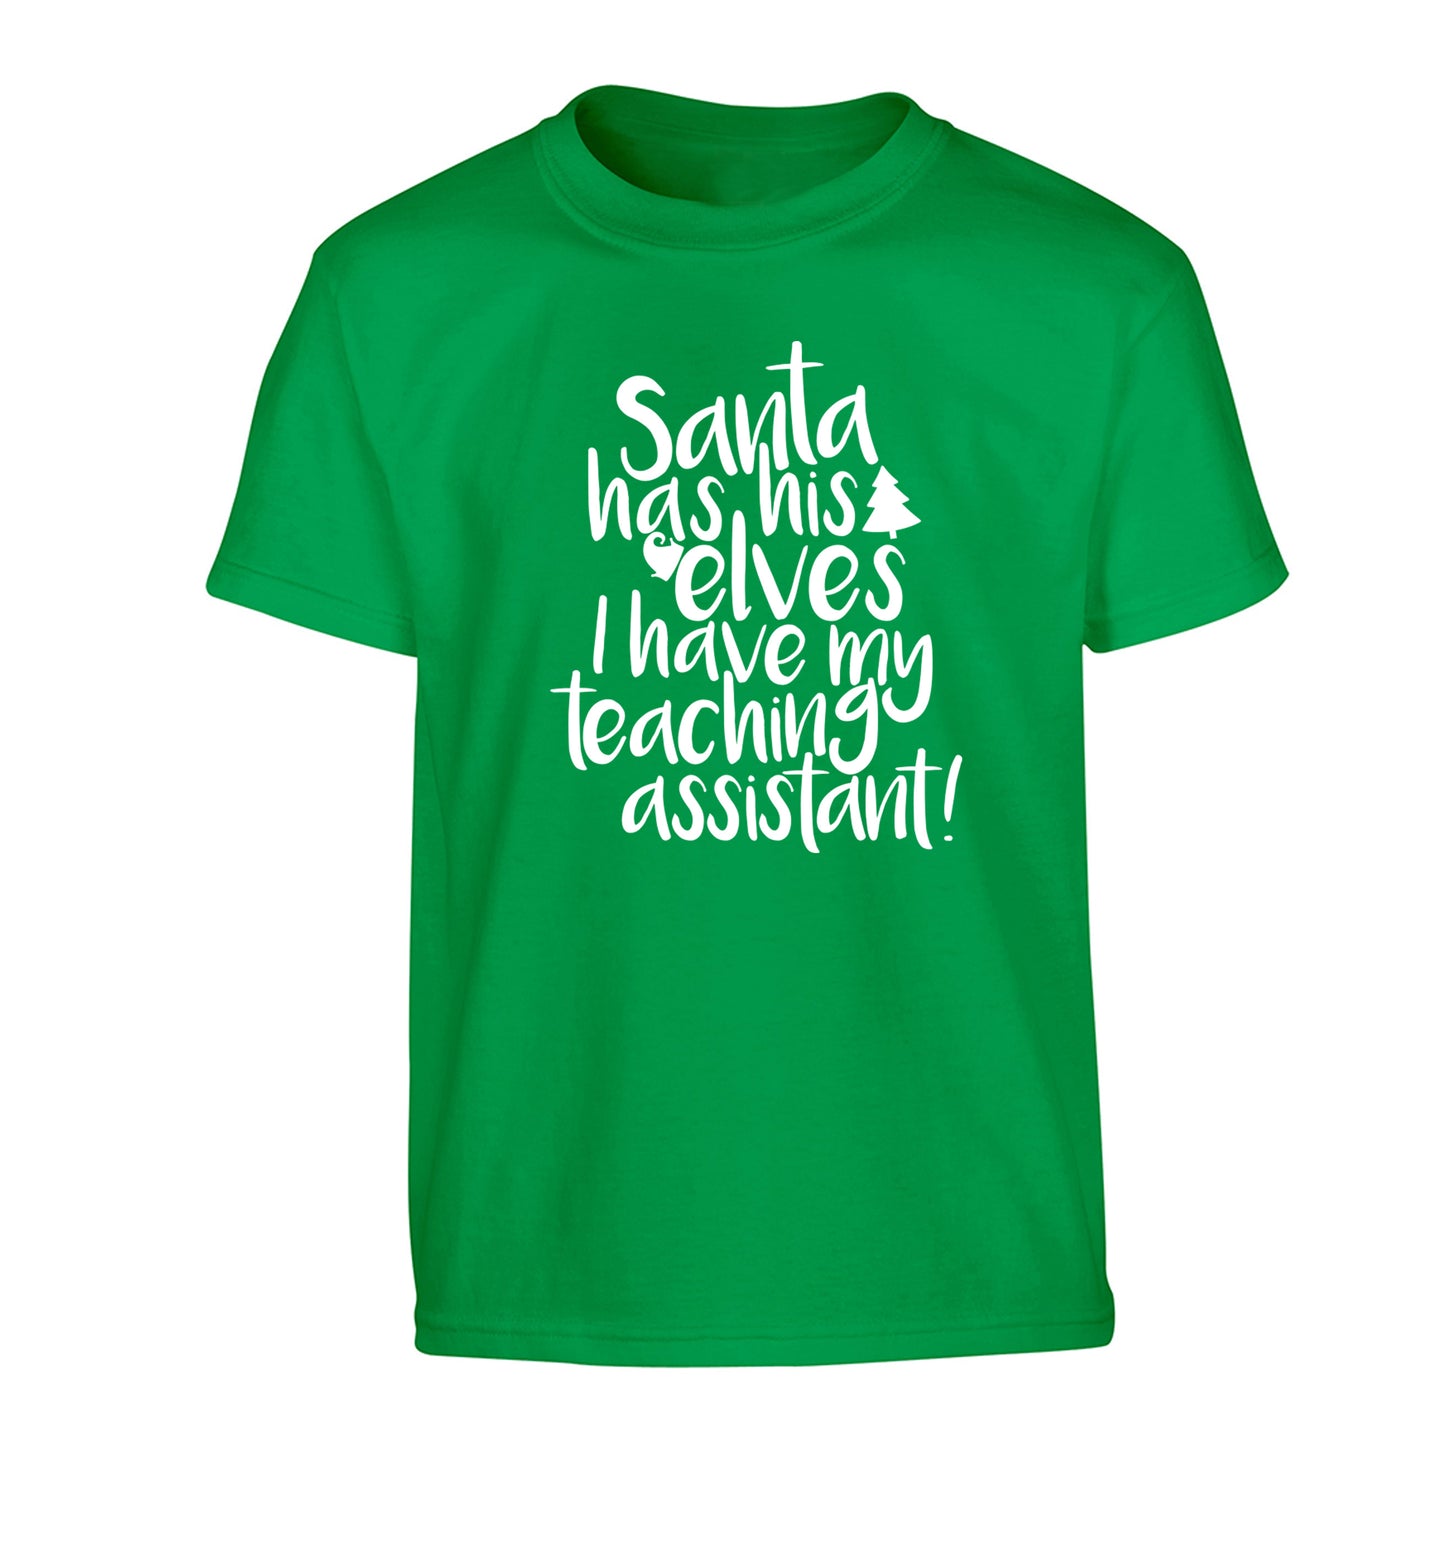 Santa has his elves I have my teaching assistant Children's green Tshirt 12-14 Years